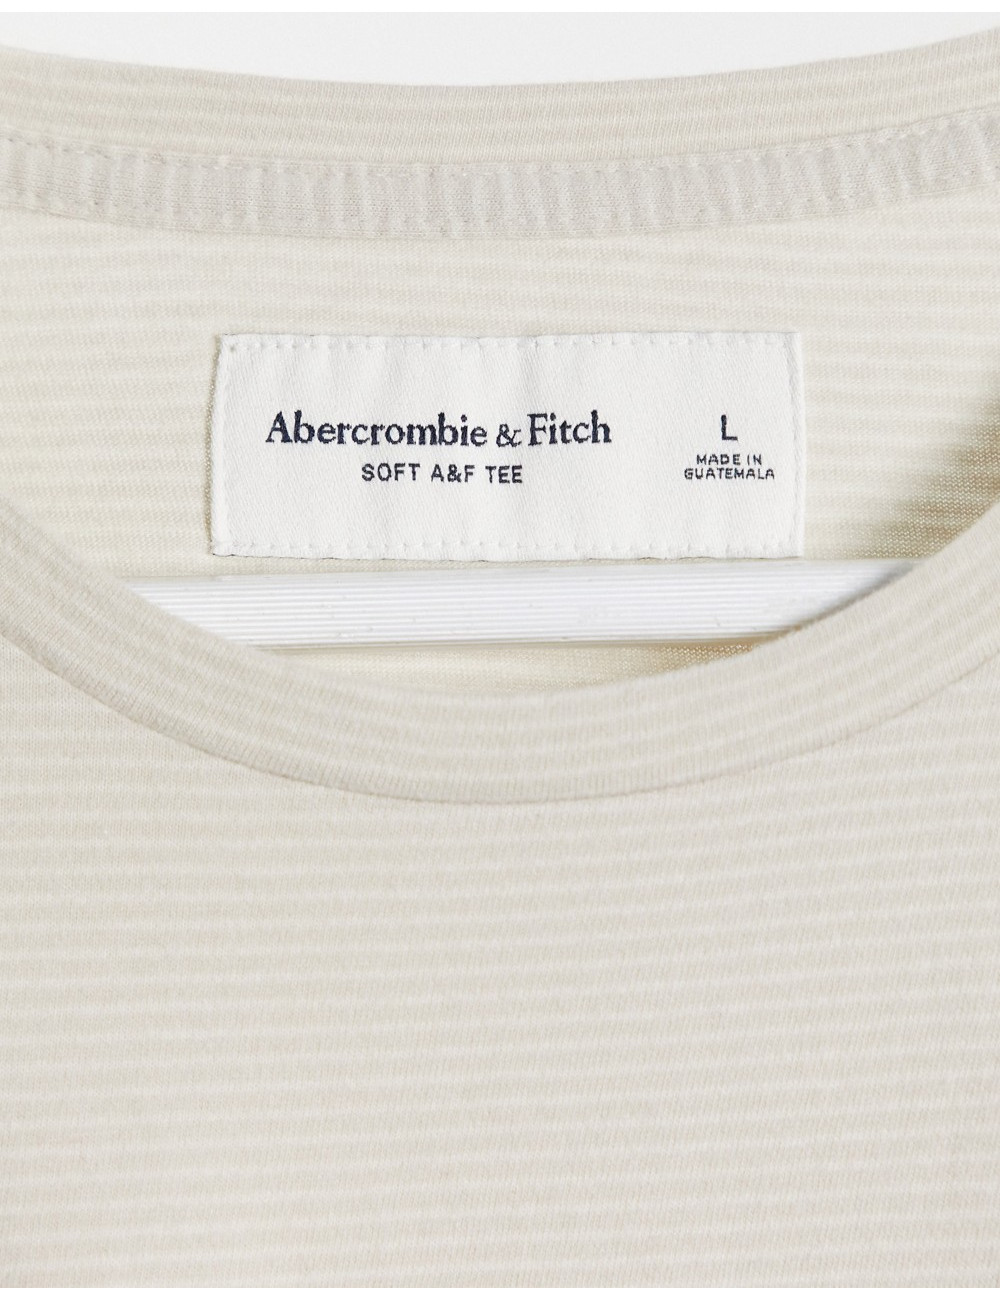 Abercrombie & Fitch chest...